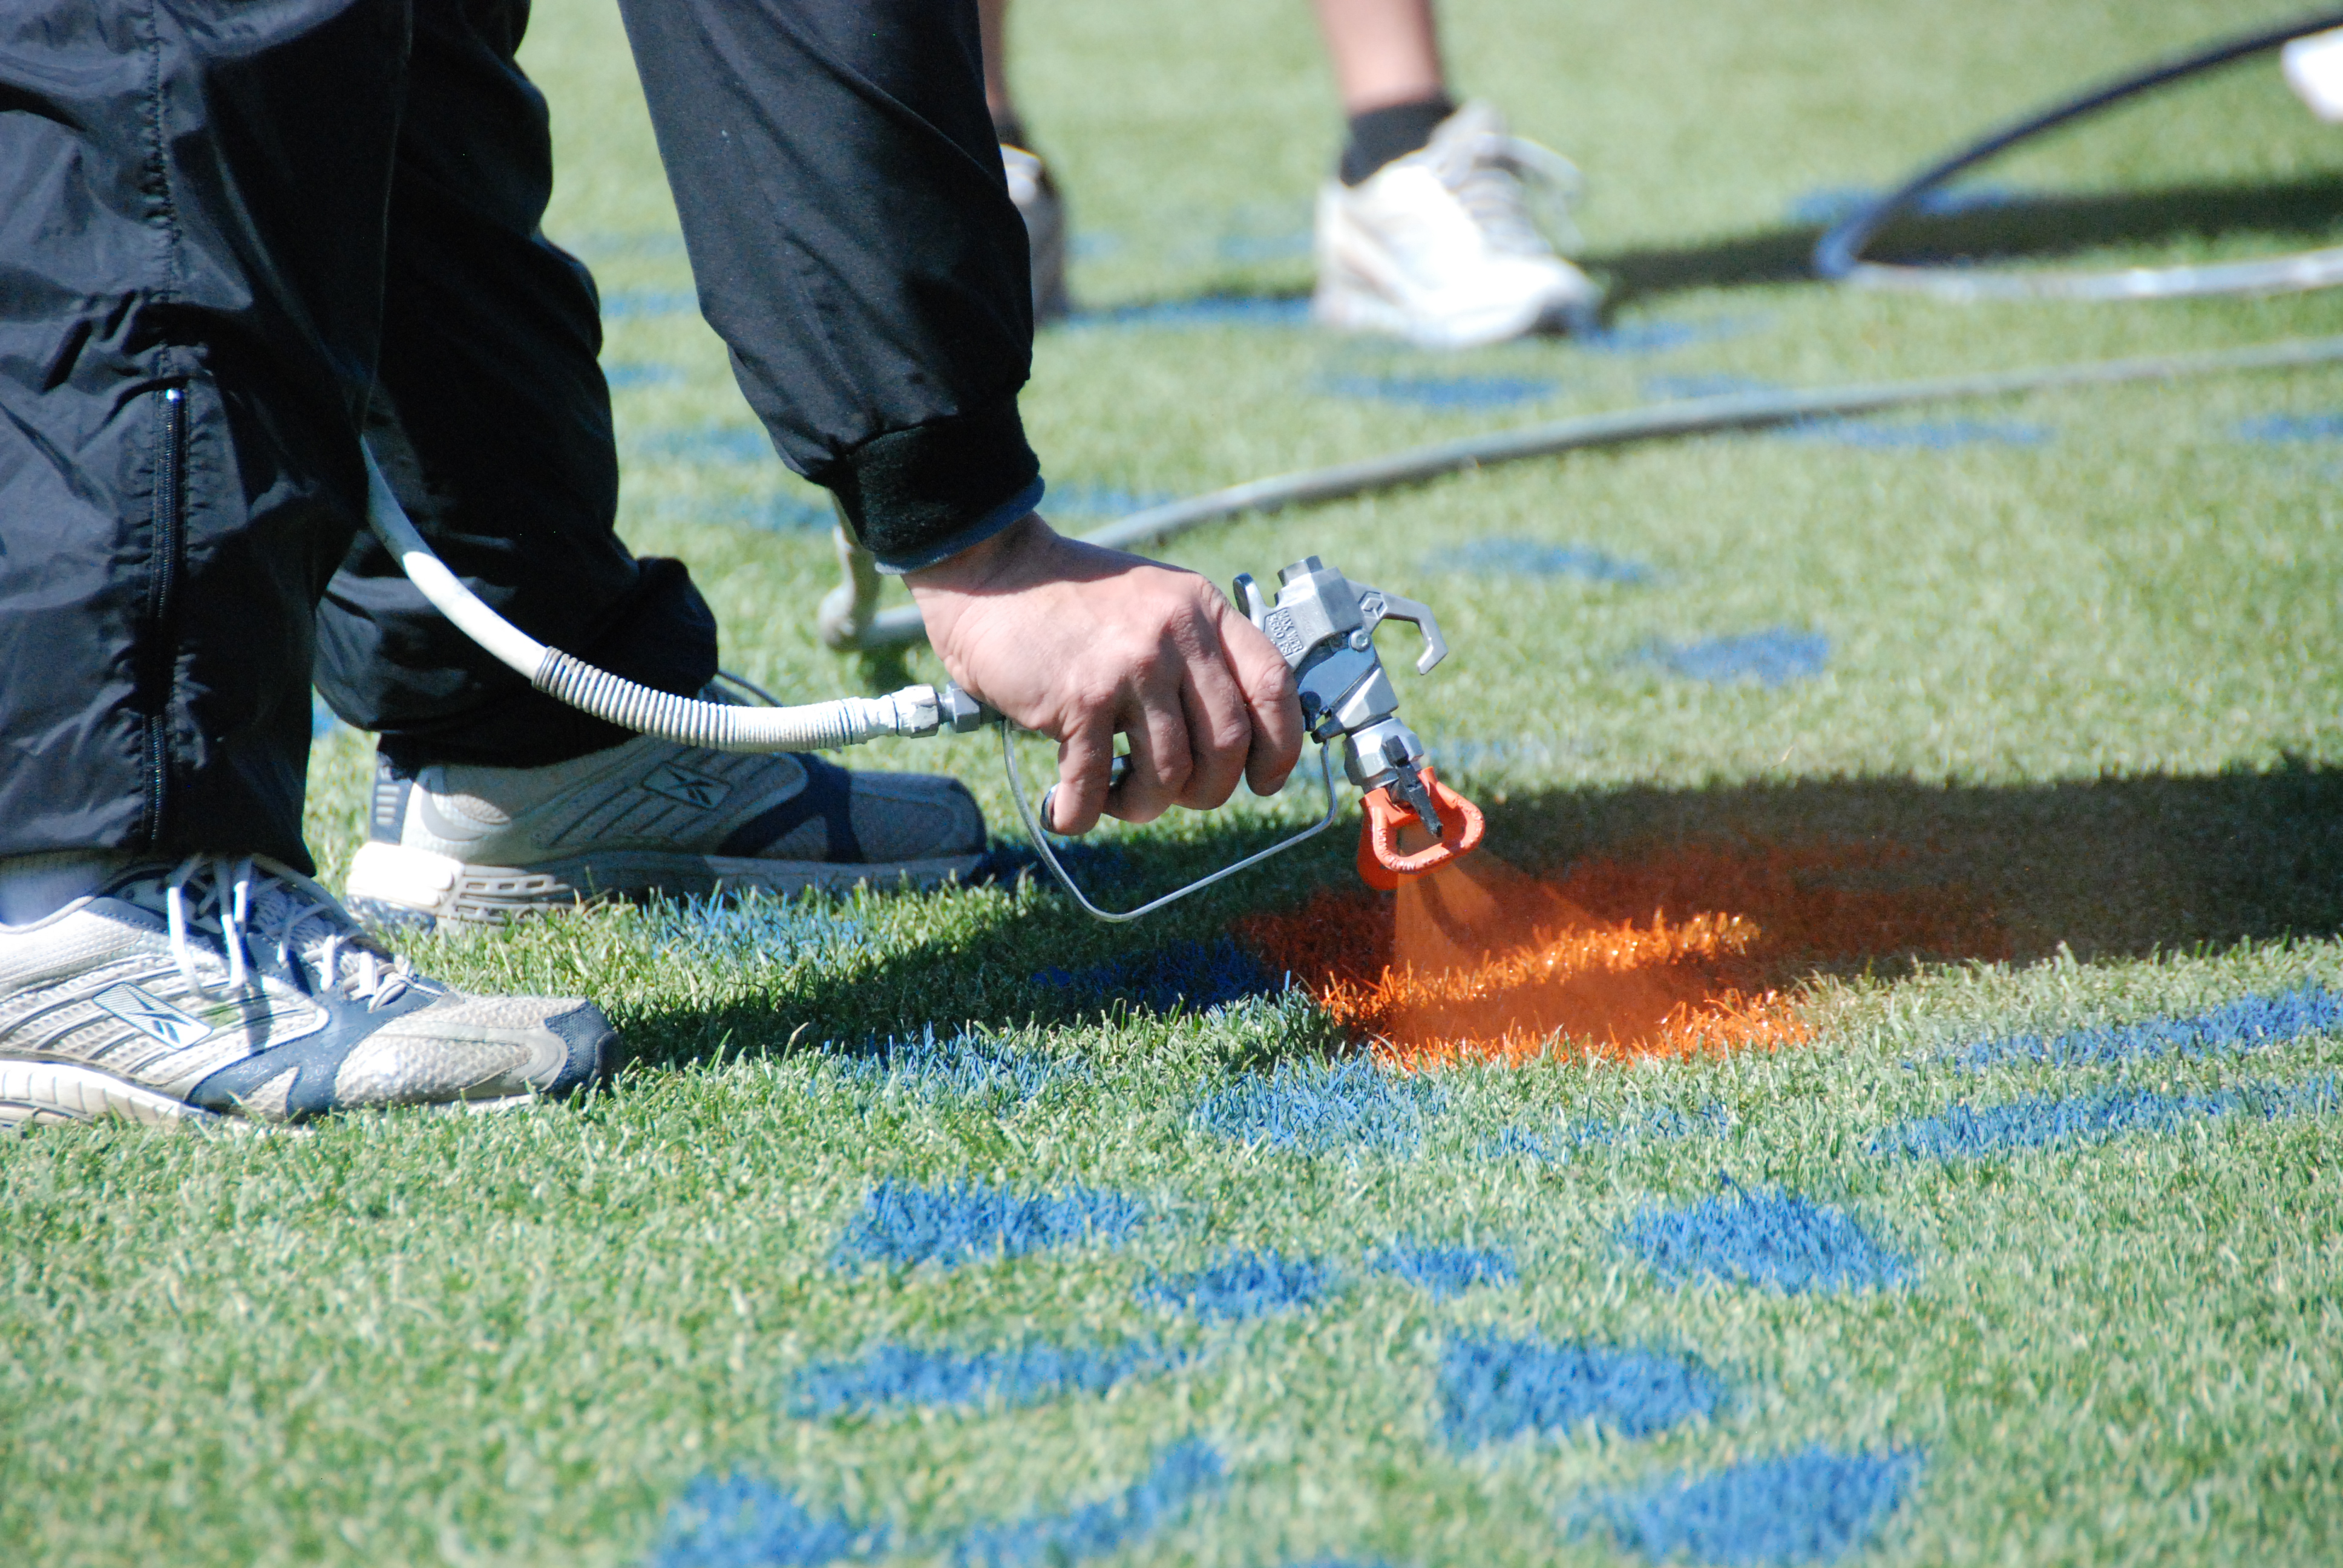 Cool stuff: painting the Broncos logo on turf | Gardening after five